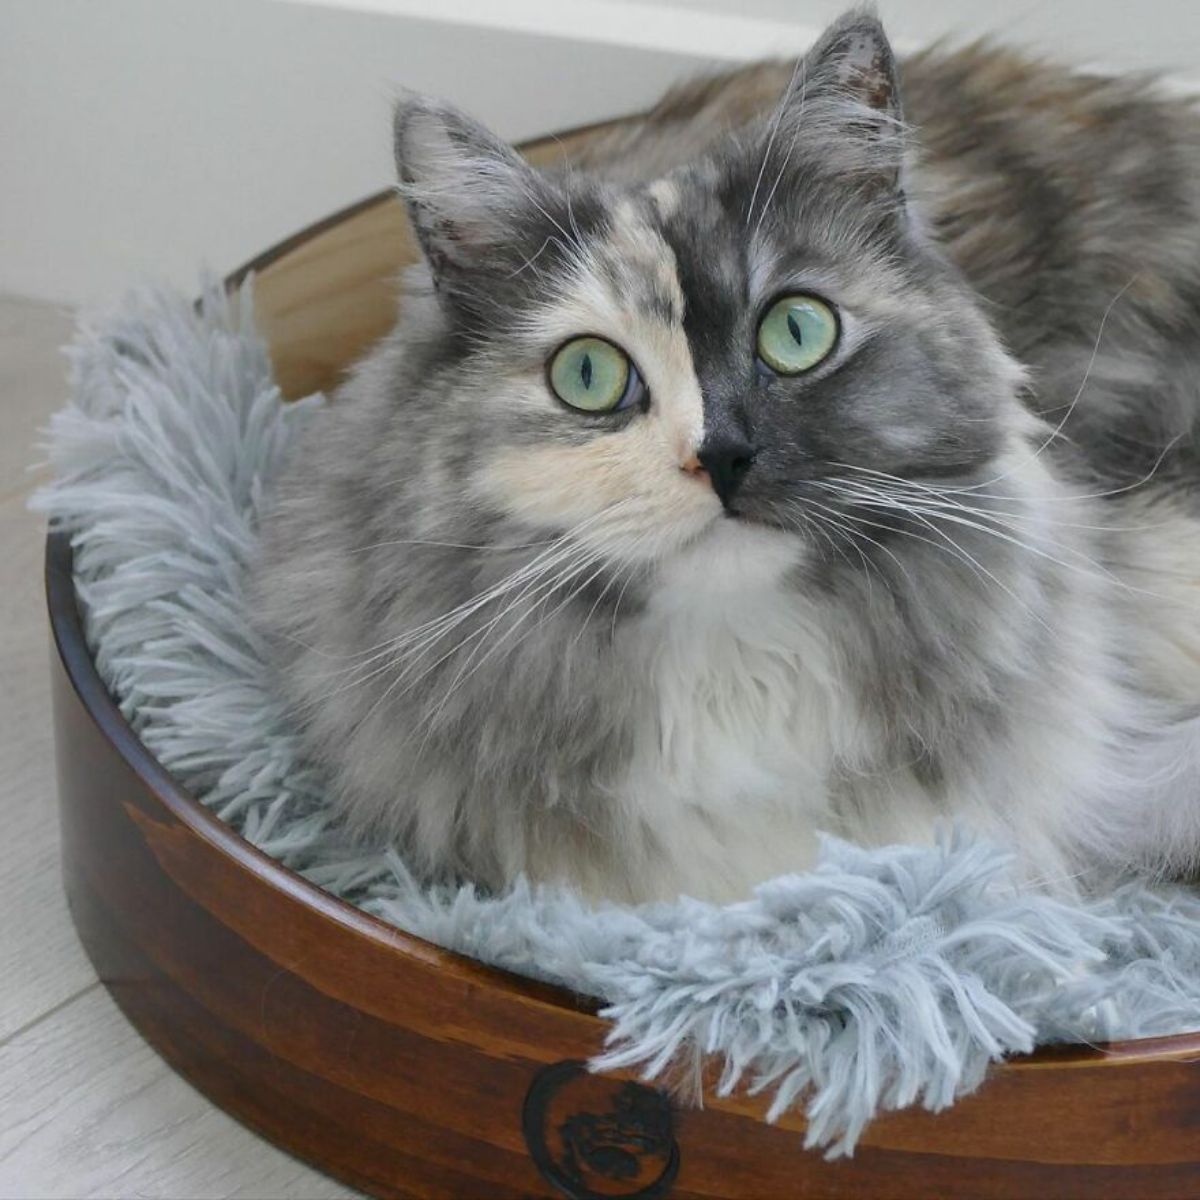 fluffy cat with right side of face being grey and left side being black laying on a blue blanket in a wooden cat bed